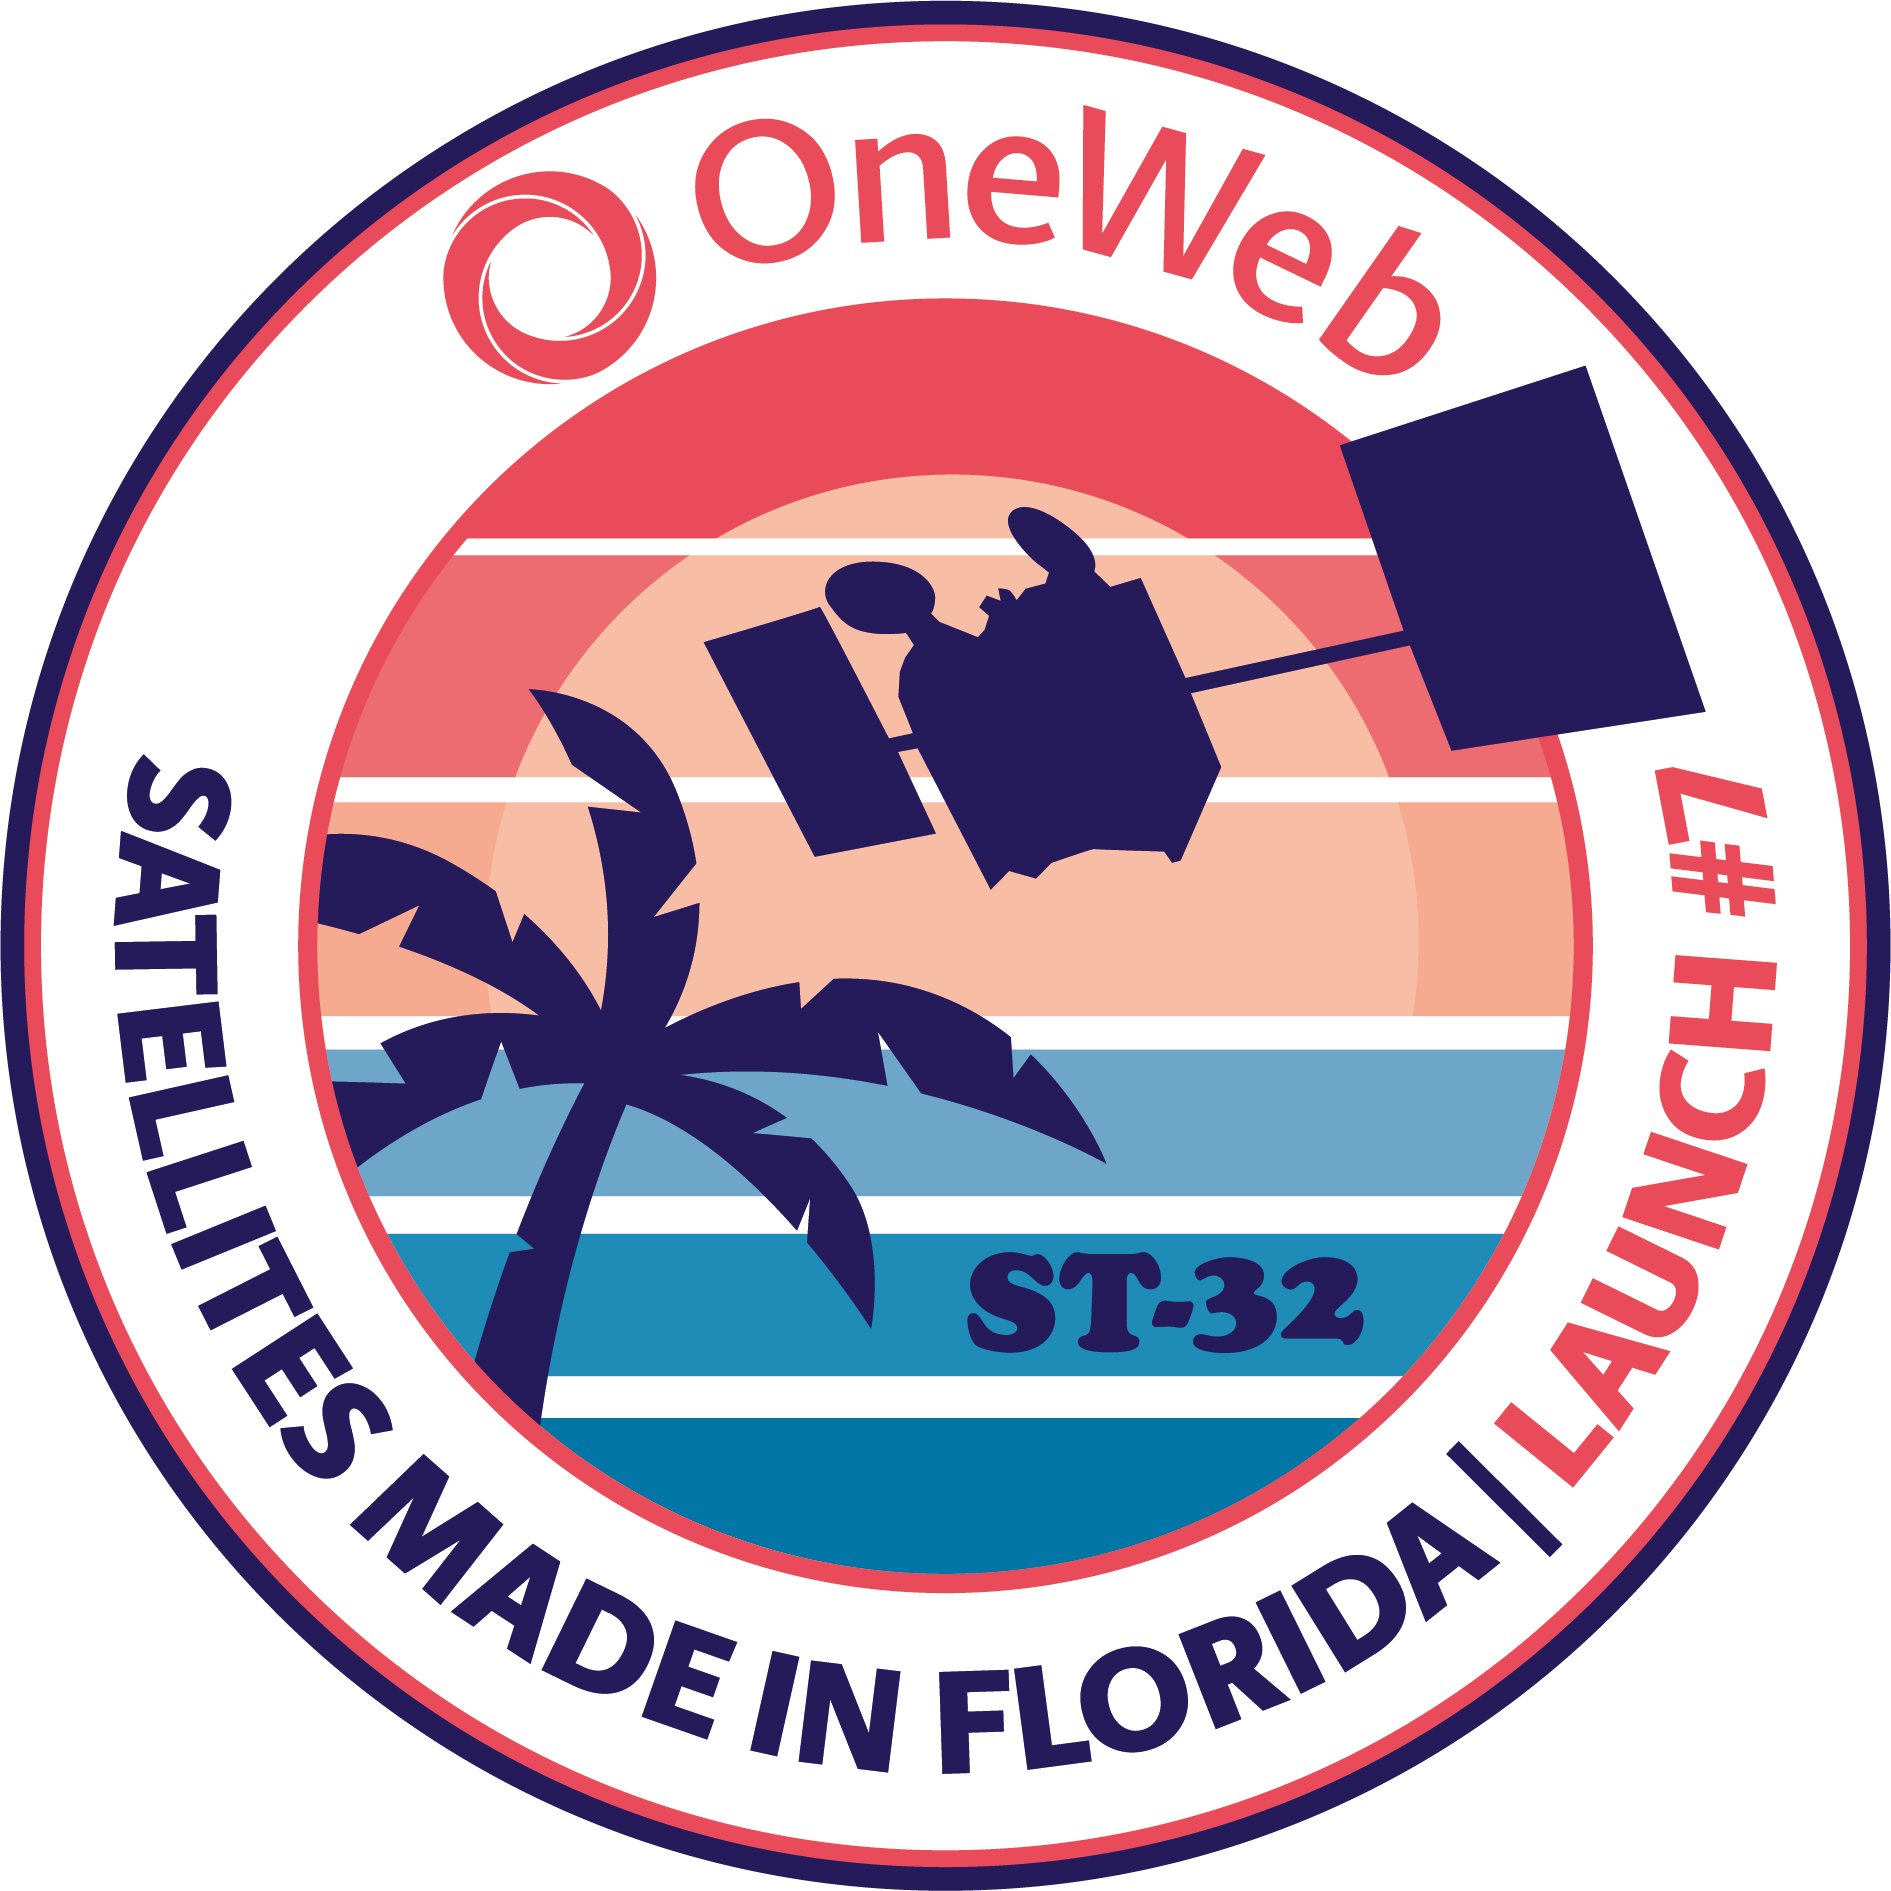 Mission patch for OneWeb 7